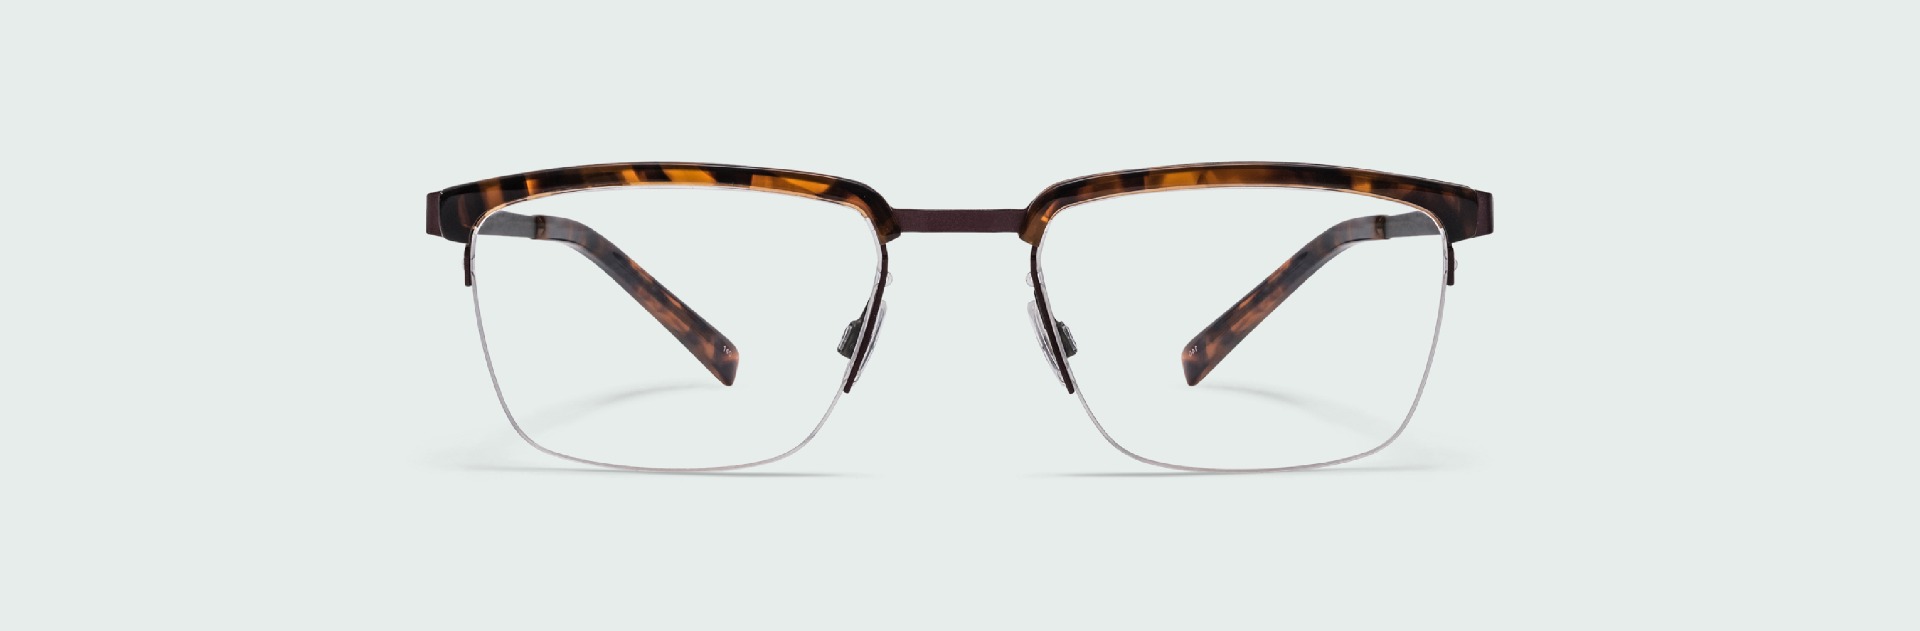 Glasses Hut Offers Some of the Best Tortoise Shell Glass Frames Available Right Now